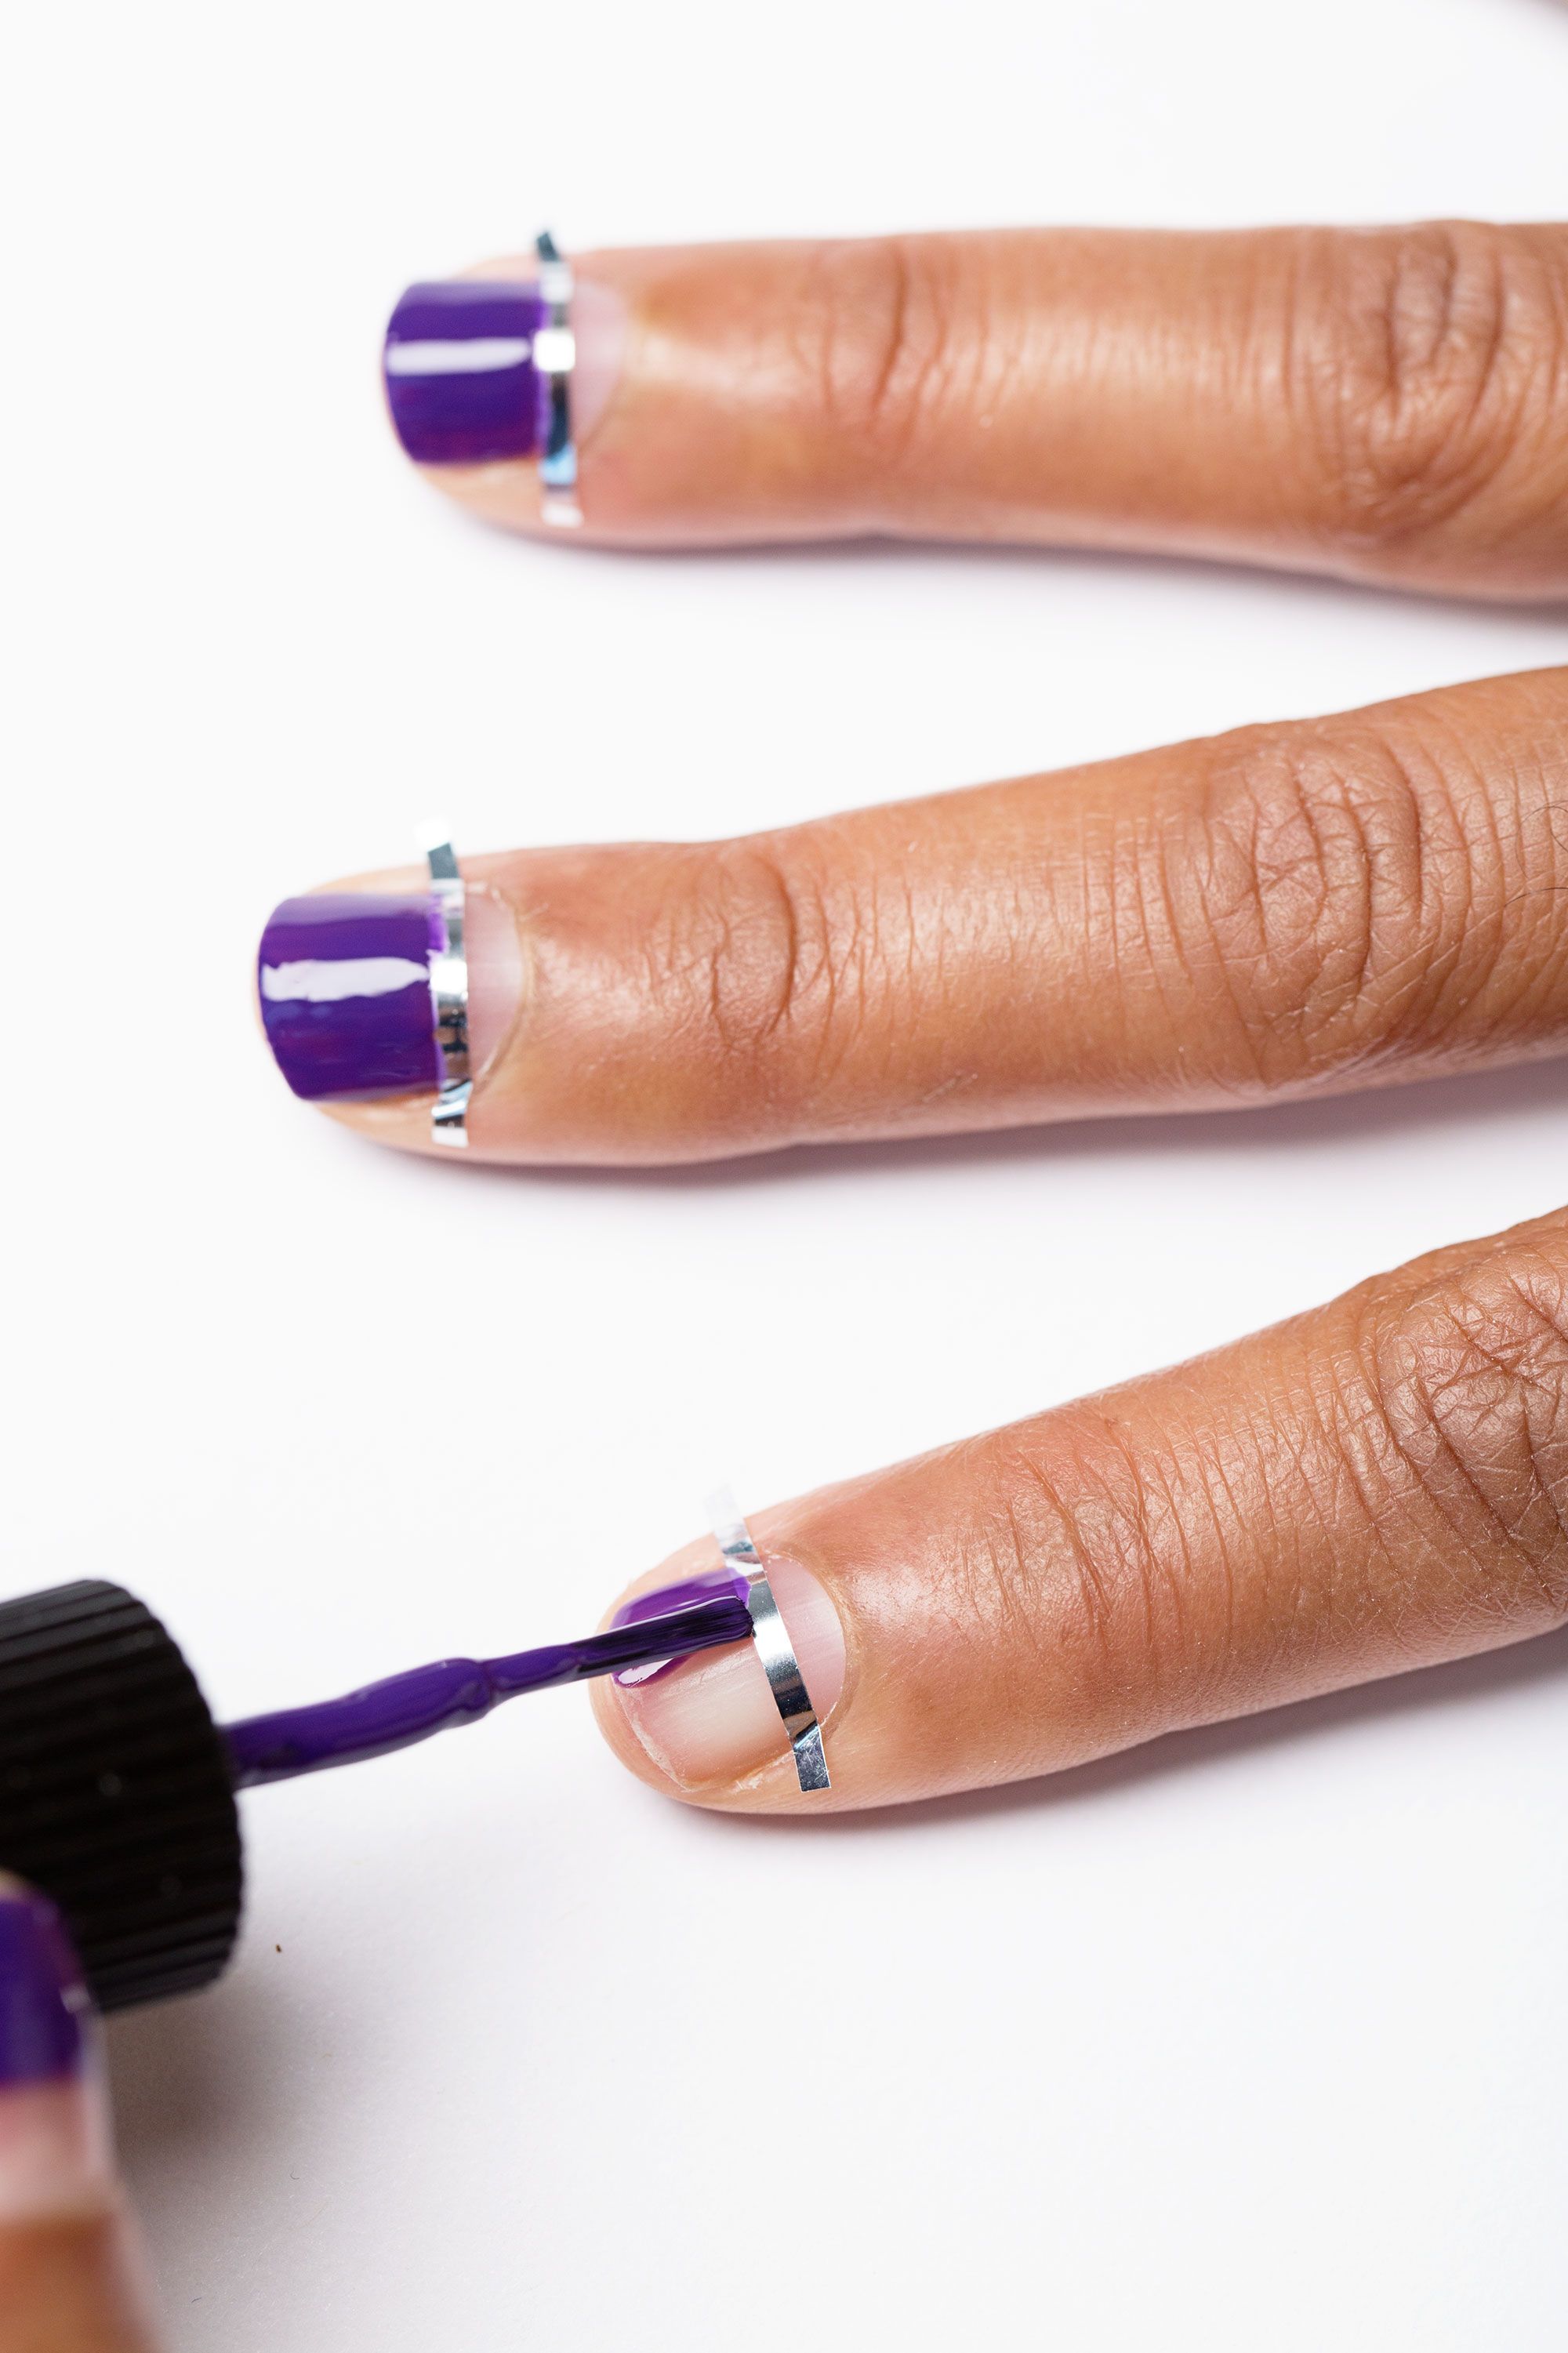 Y2K Nail Ideas That'll Take You Right Back to the Year 2000 — See Photos |  Allure